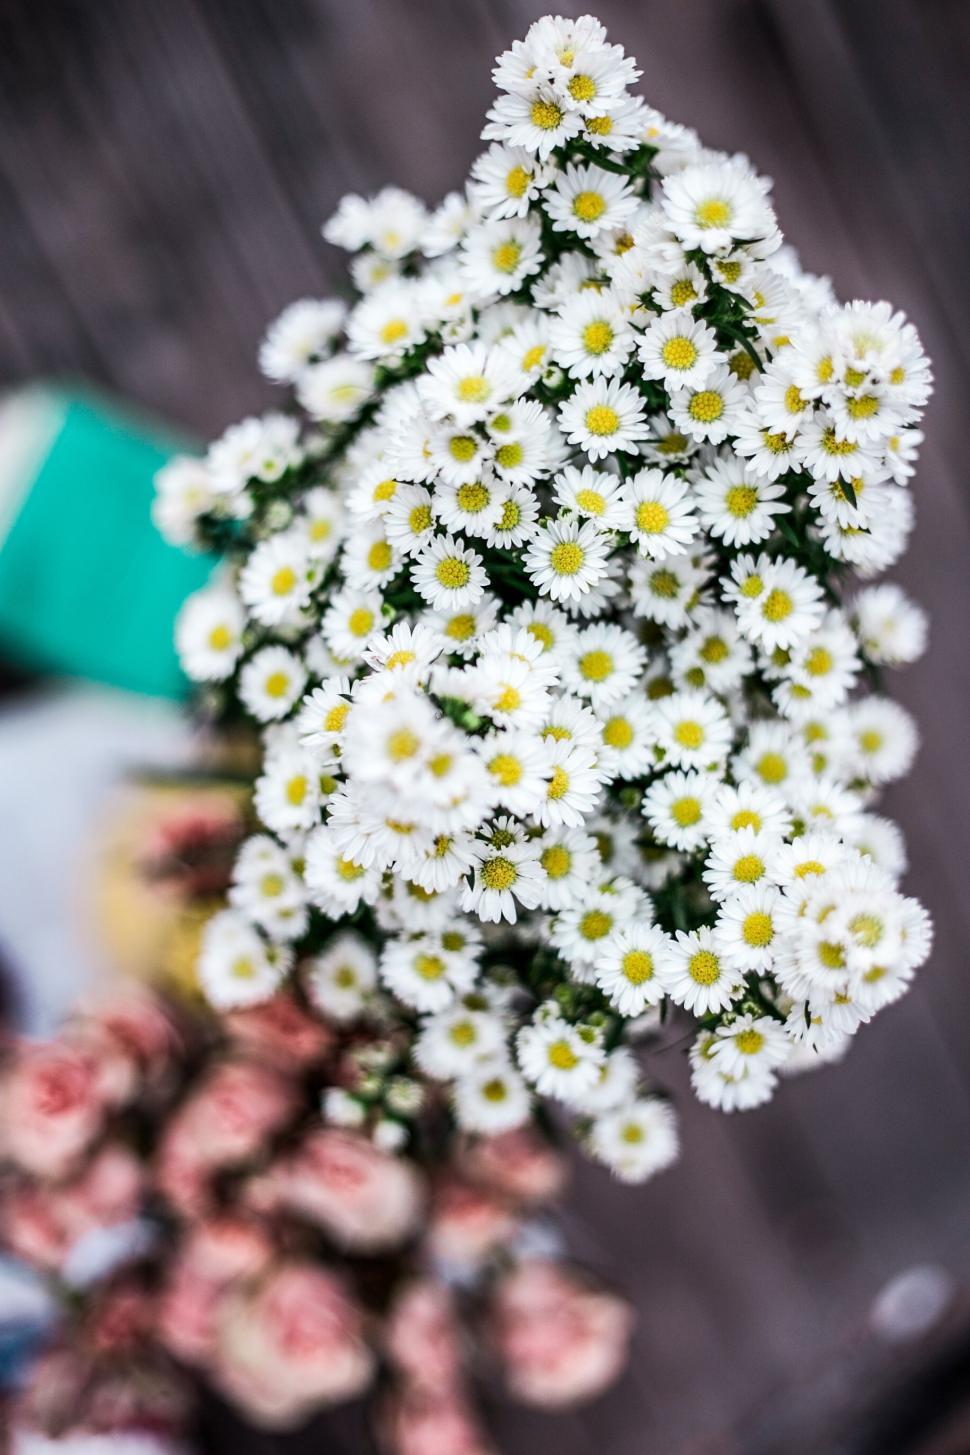 Free Image of A Bunch of Daisies in a Vase on a Table 